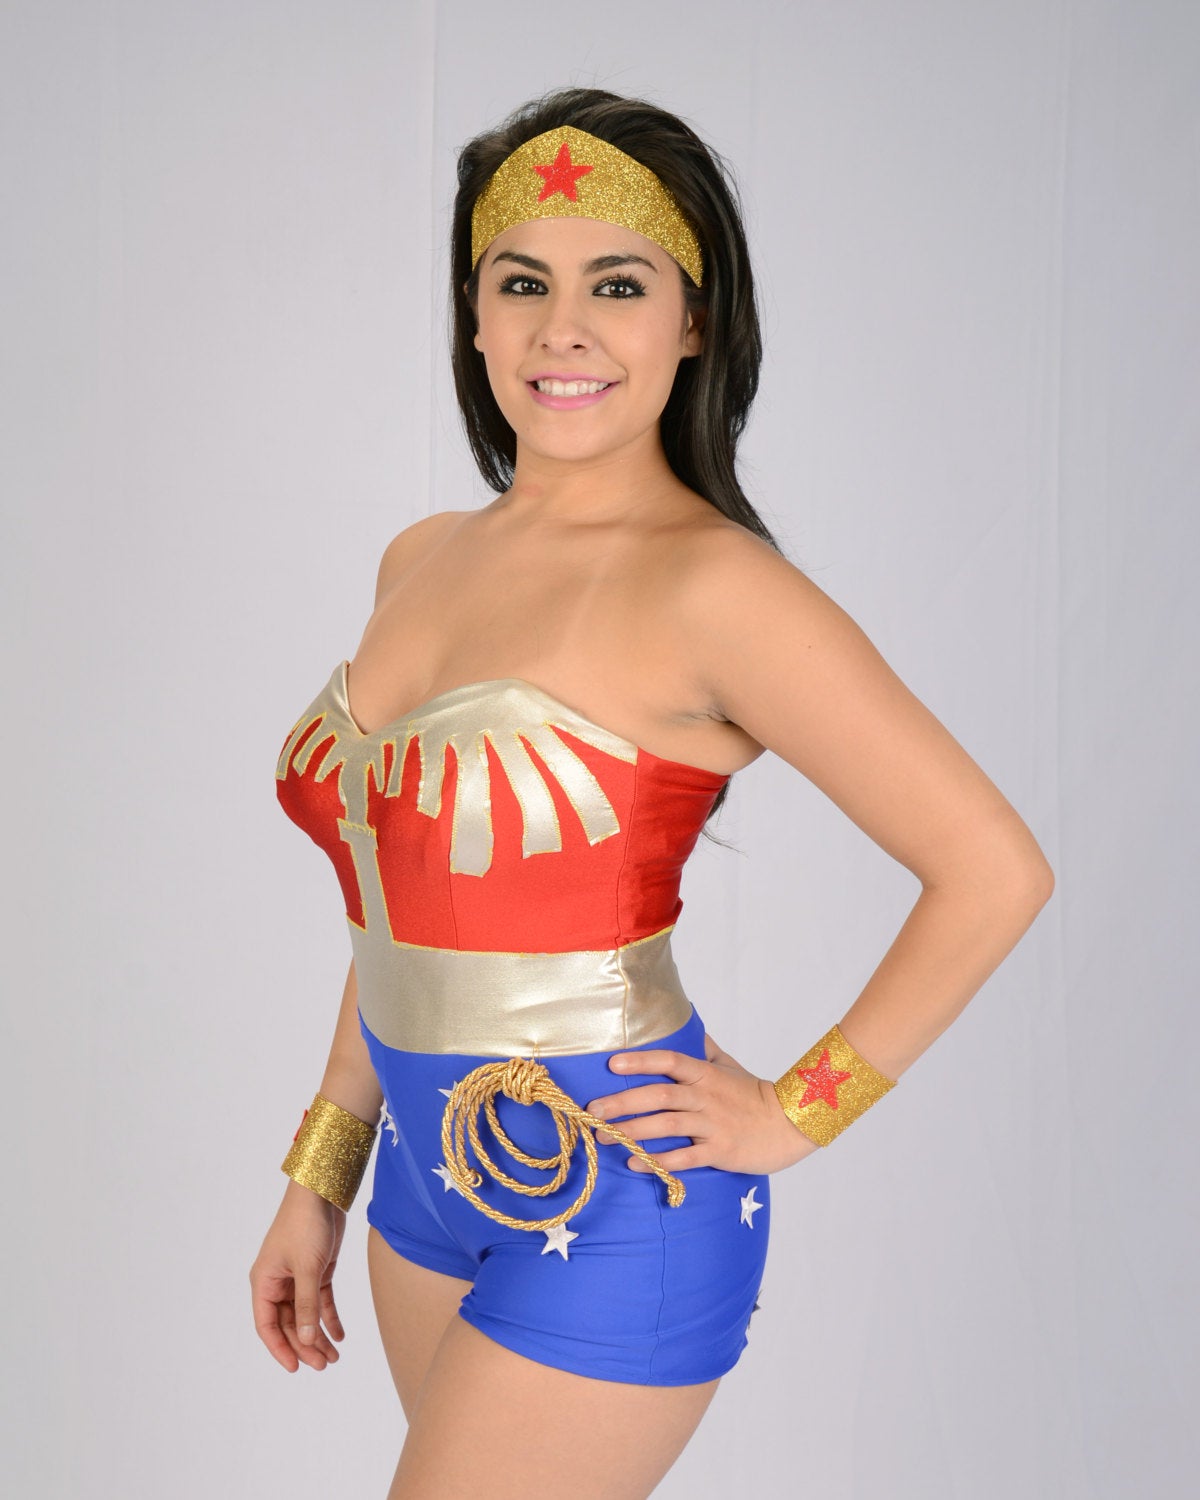 Wonder Woman tiara, cuffs, and lasso of truth